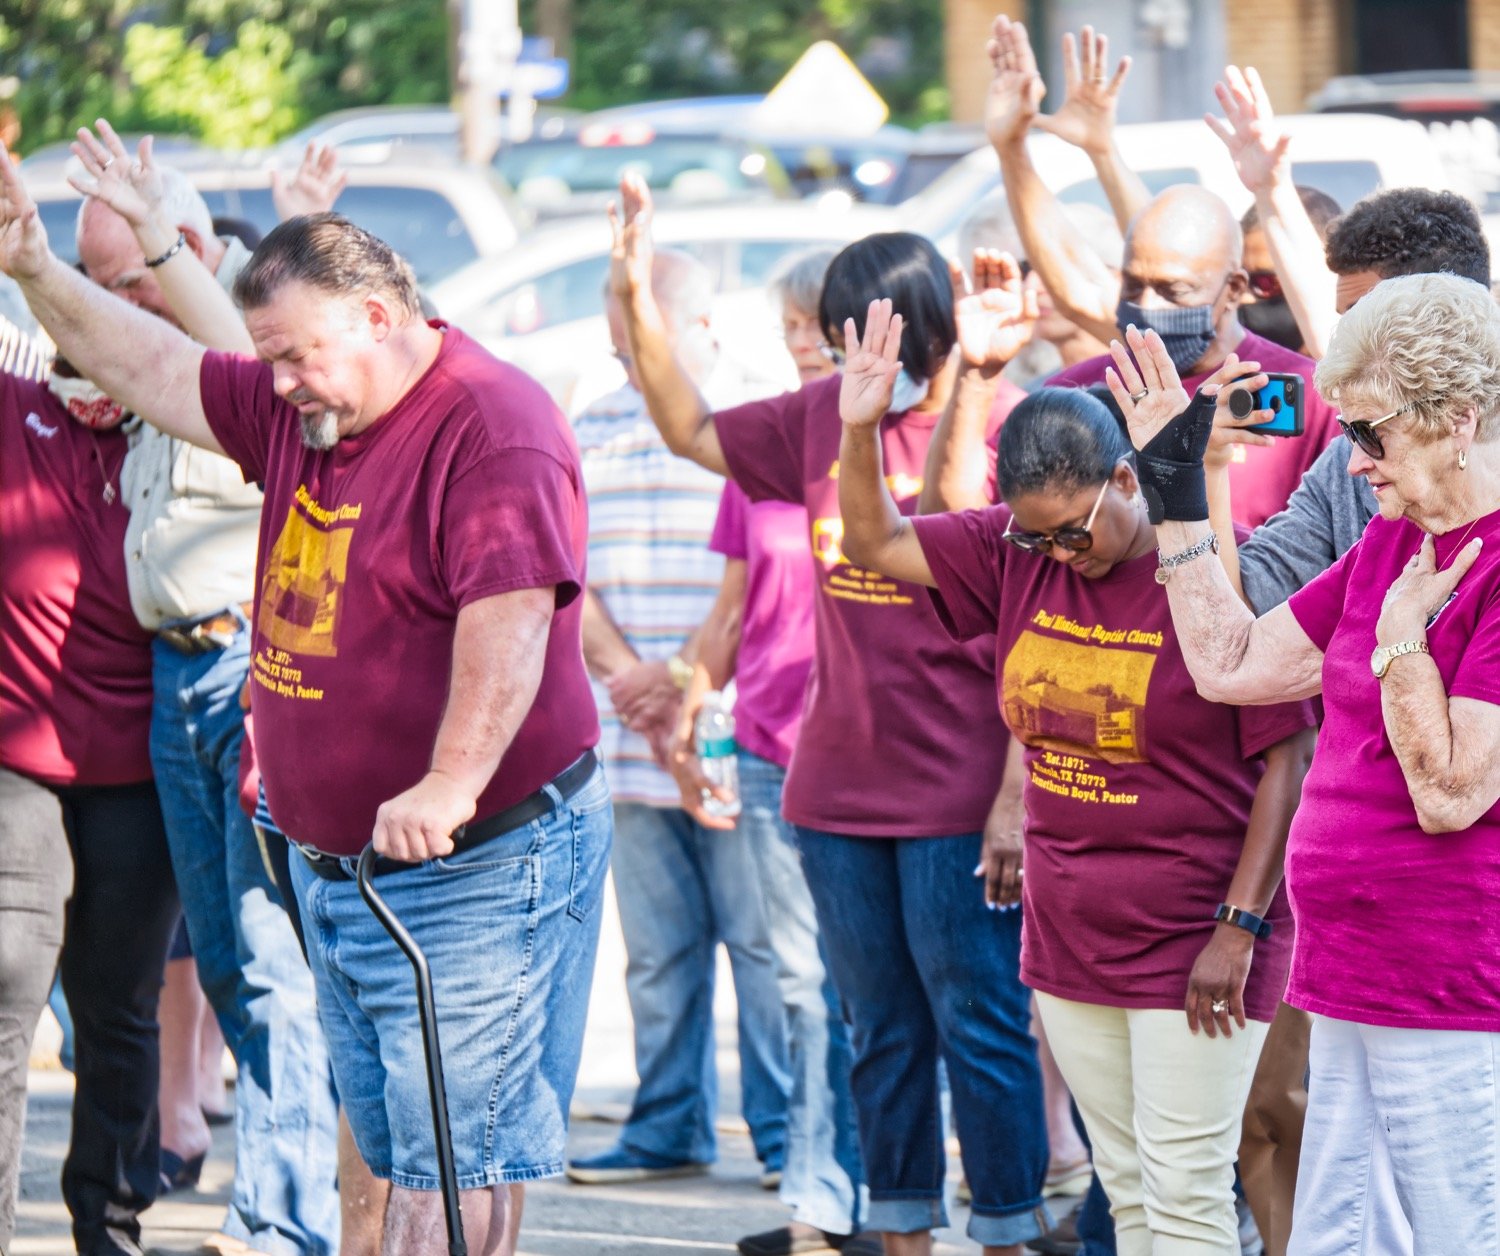 Participants at the Saturday morning prayer service on the courthouse square in Quitman raise hands in unison.